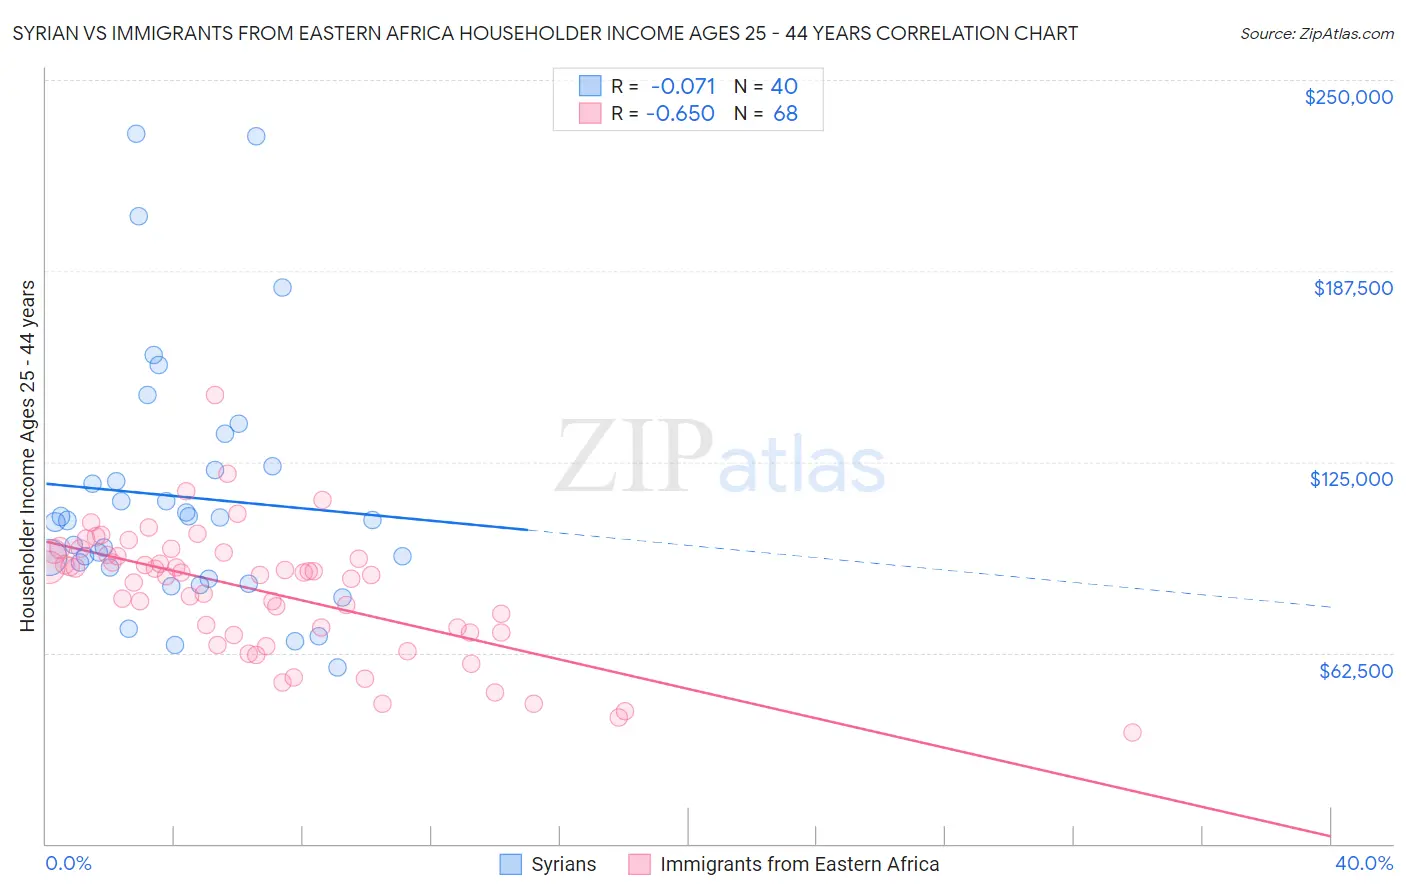 Syrian vs Immigrants from Eastern Africa Householder Income Ages 25 - 44 years